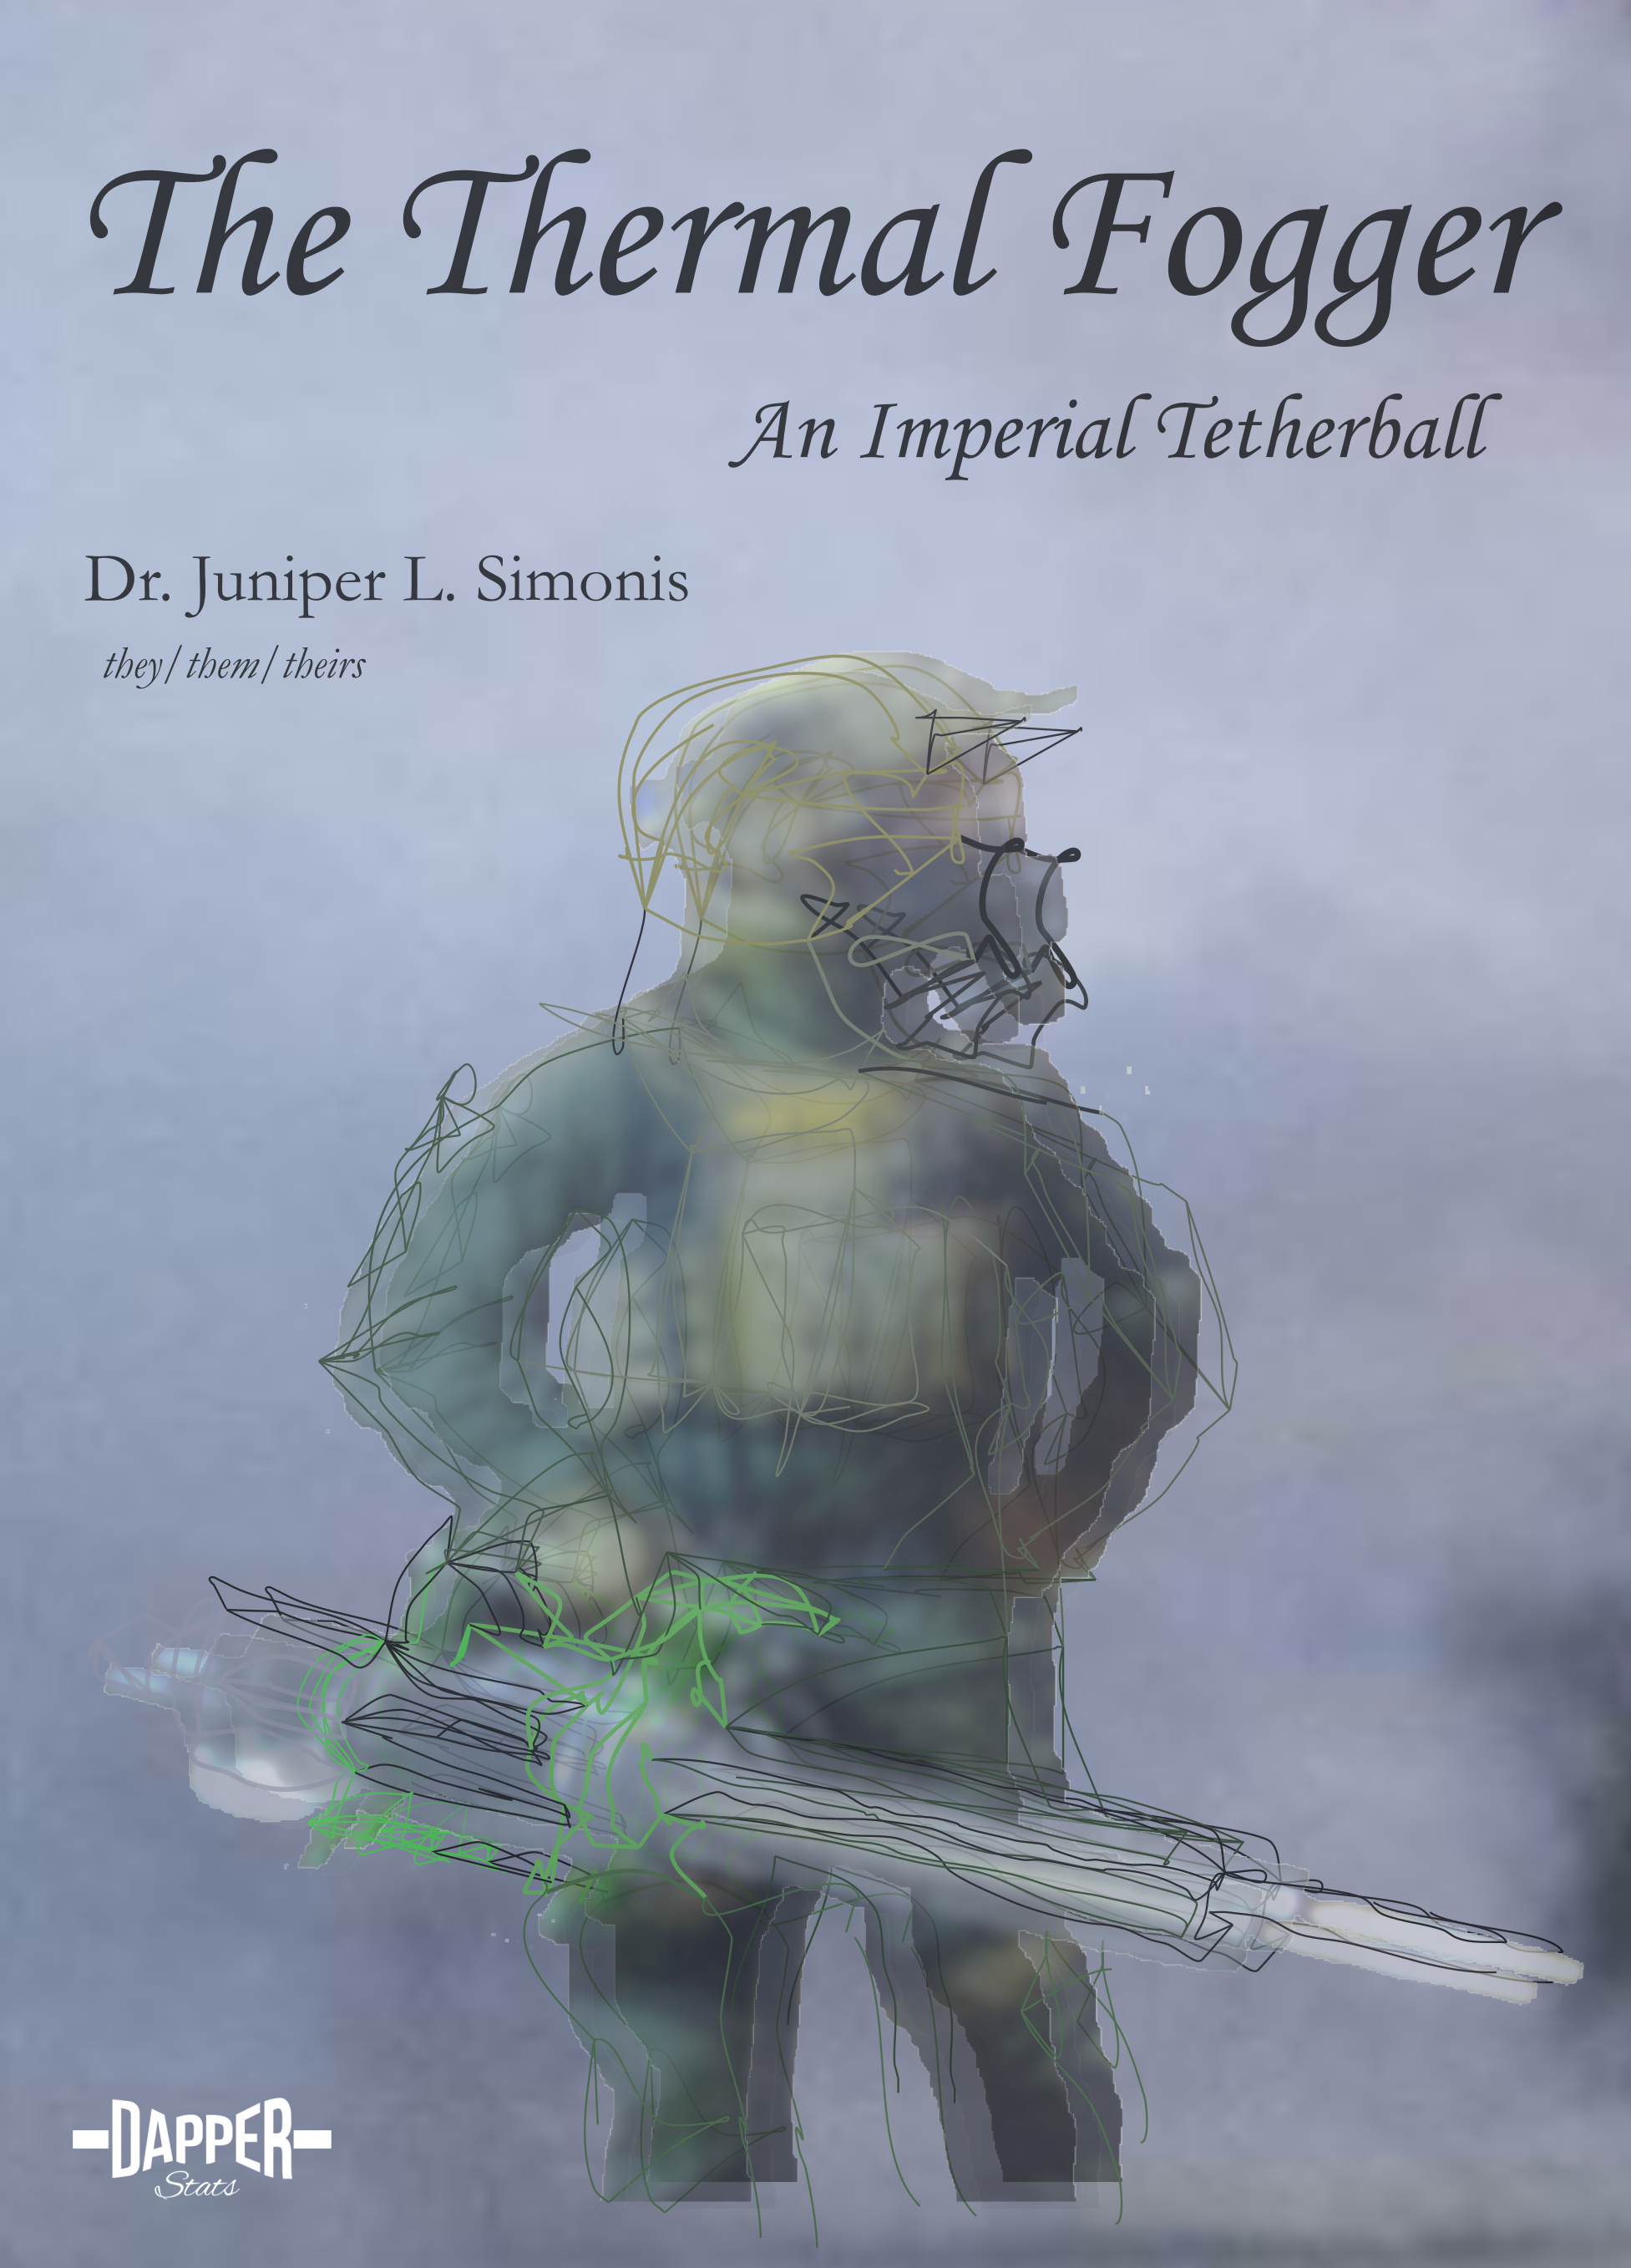 Cover for the book, which has fogger clouds as background and says The Thermal Fogger An Imperial Thetherball at the top and Dr Juniper L Simonis they/them/theirs in the bottom right. The focal image is a blurred, sketched over, re-rendered, and otherwise edited photo of a US Customs and Border Protection agent in all green and tan camo riot gear holding a thermal fogger in their right hand.